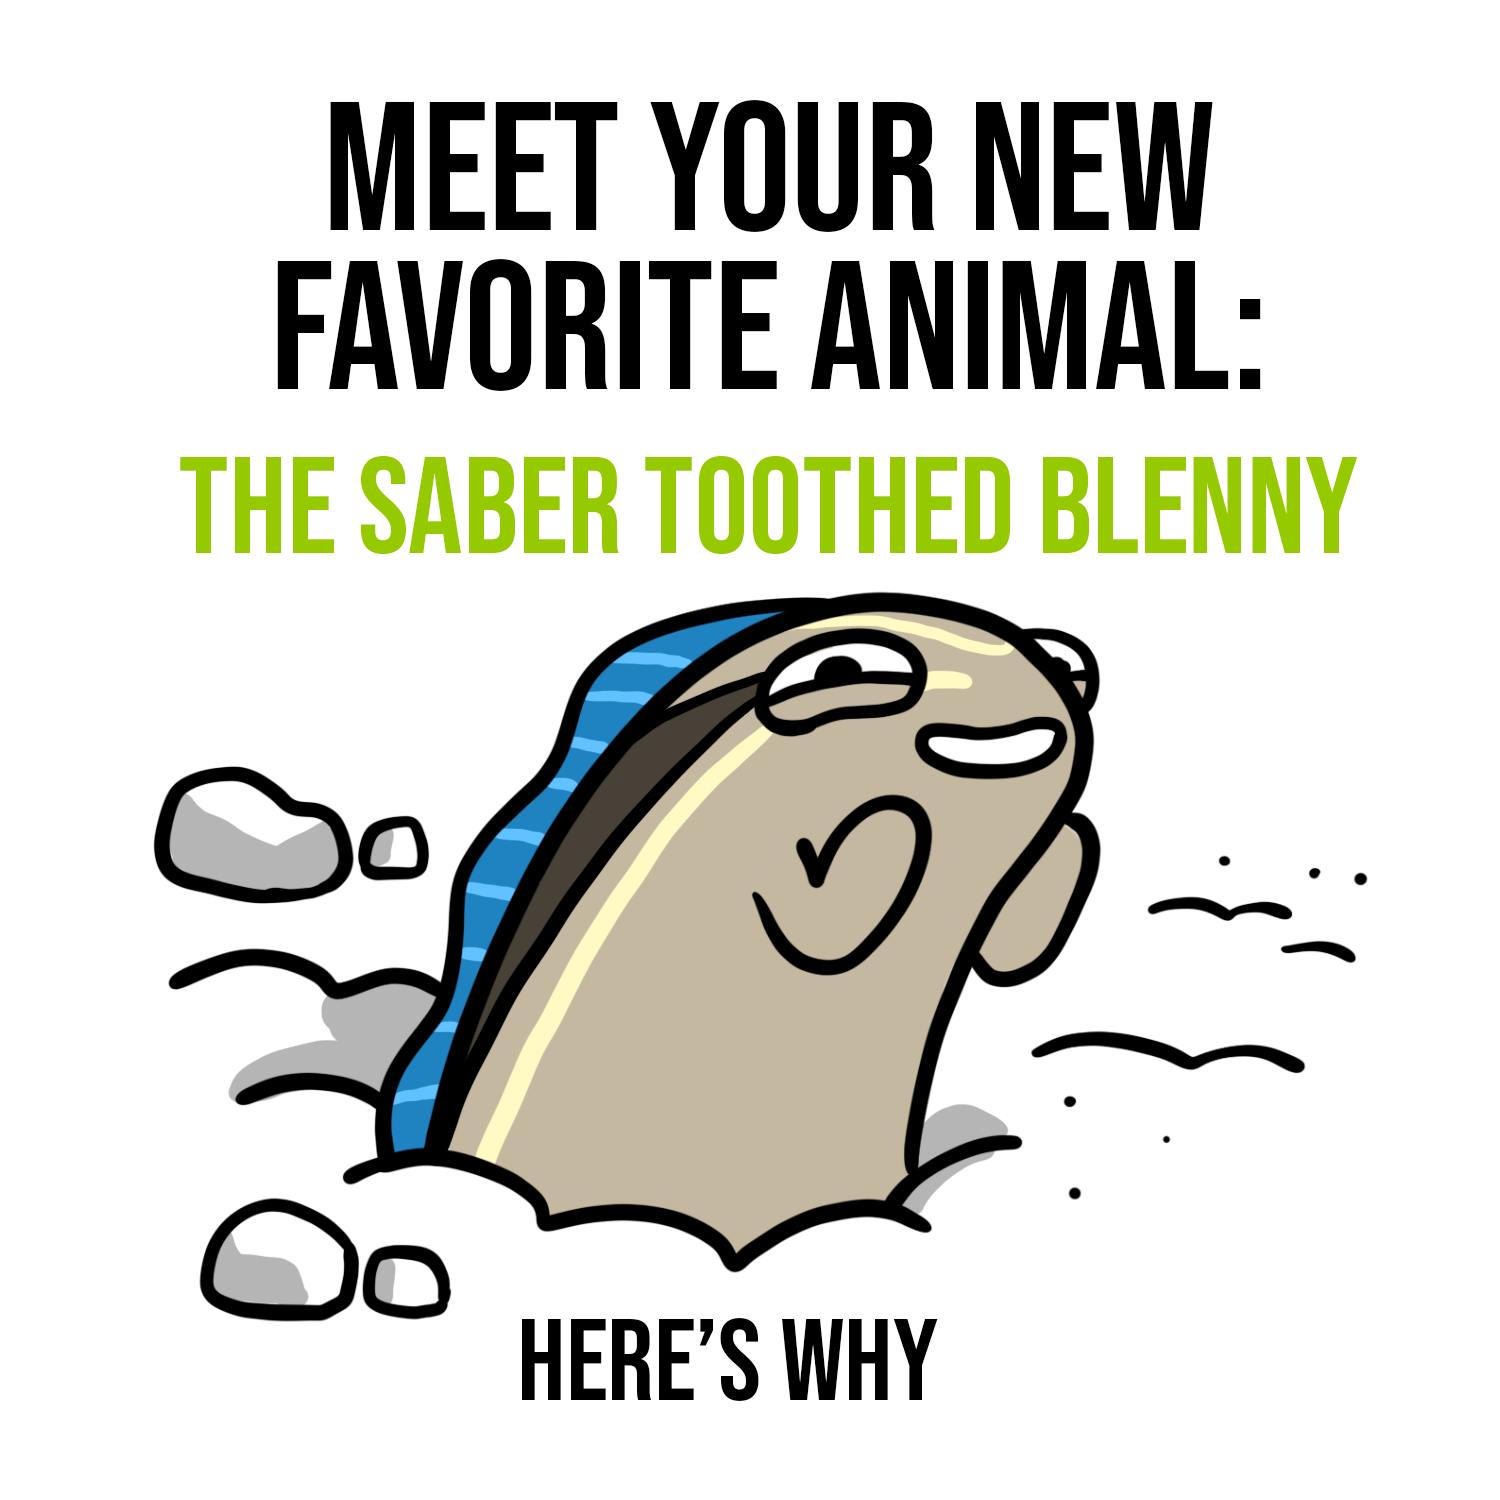 Your New Favorite Animal: The Saber Toothed Blenny